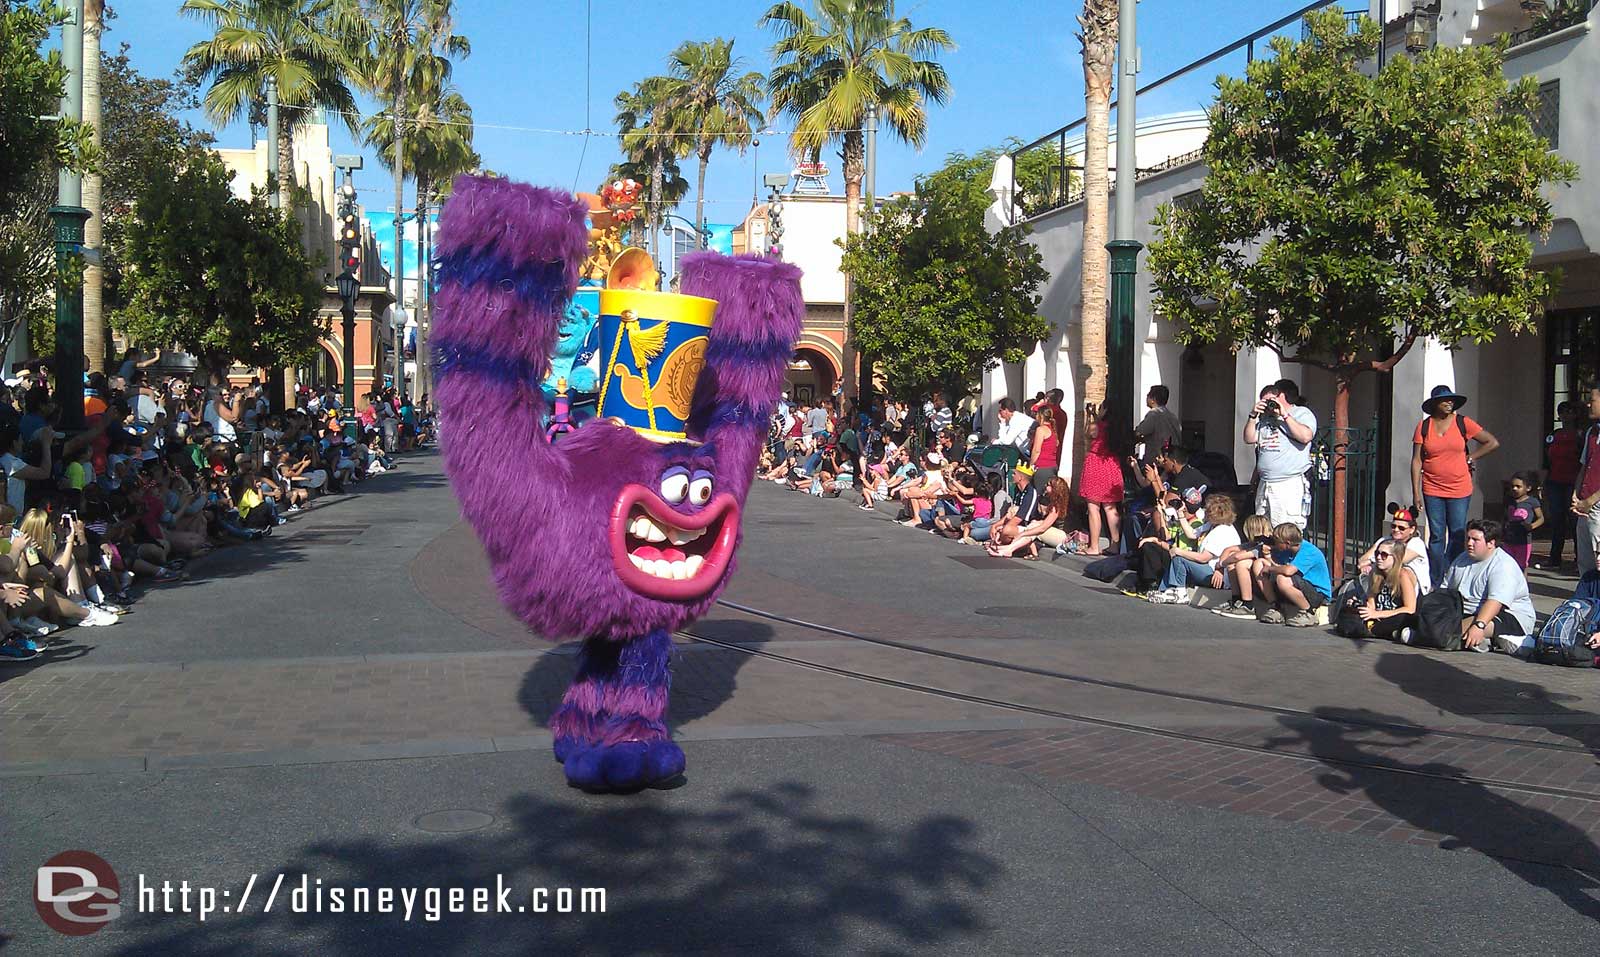 More of the Monsters University group in the Pixar Play Parade JustGotHappier